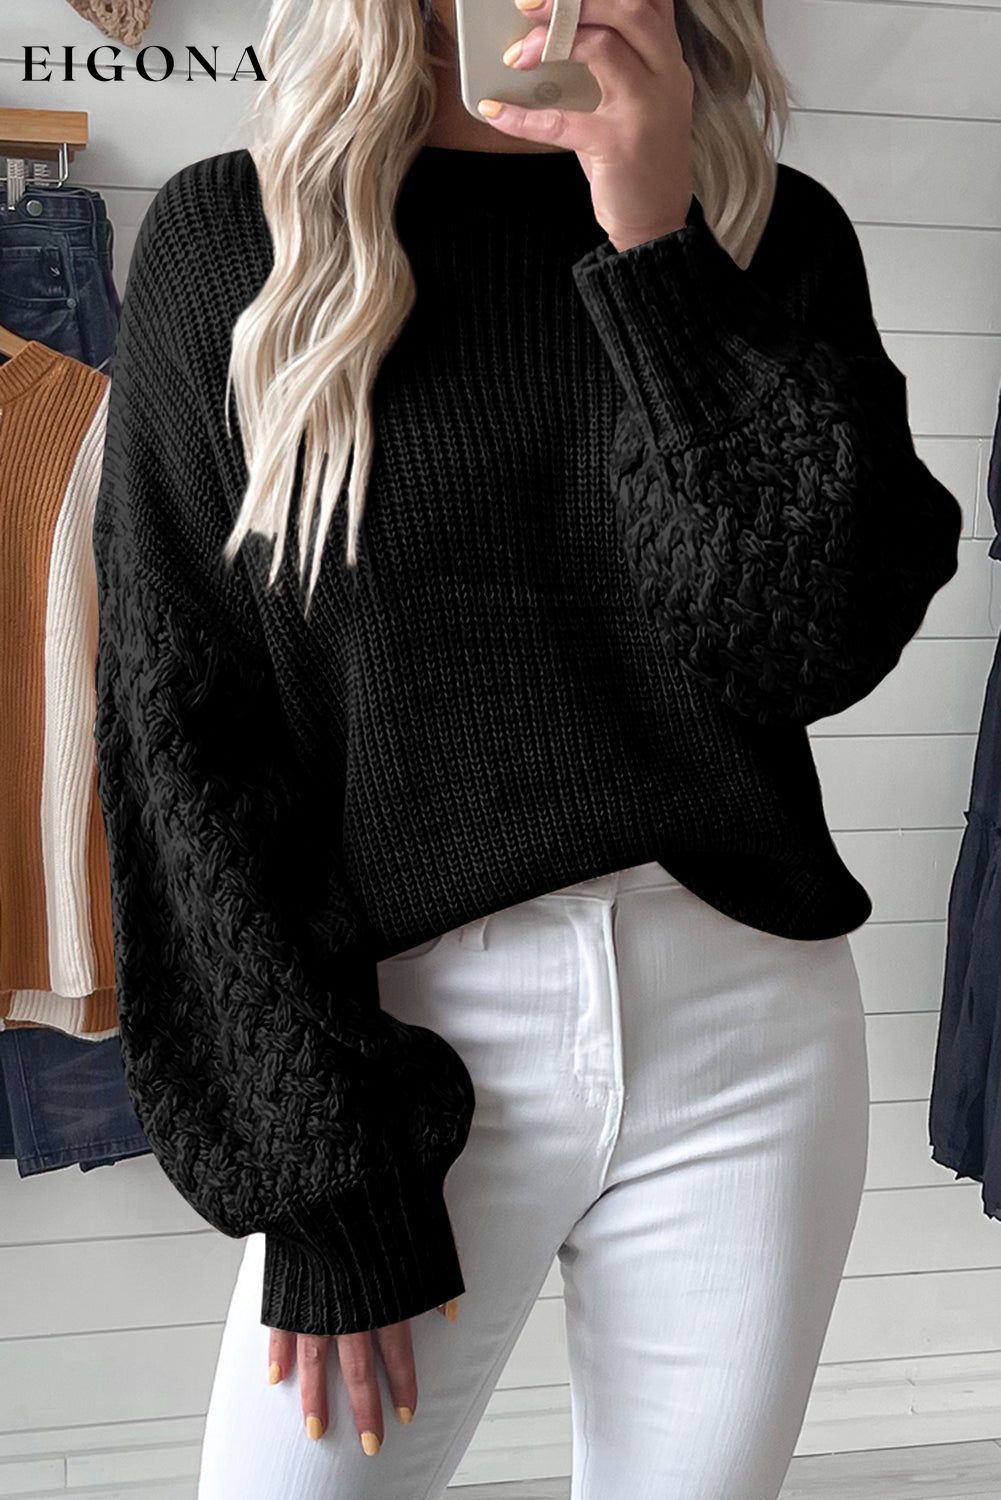 Black Cable Knit Sleeve Drop Shoulder Sweater Black 100%Acrylic clothes Sweater sweaters Sweatshirt